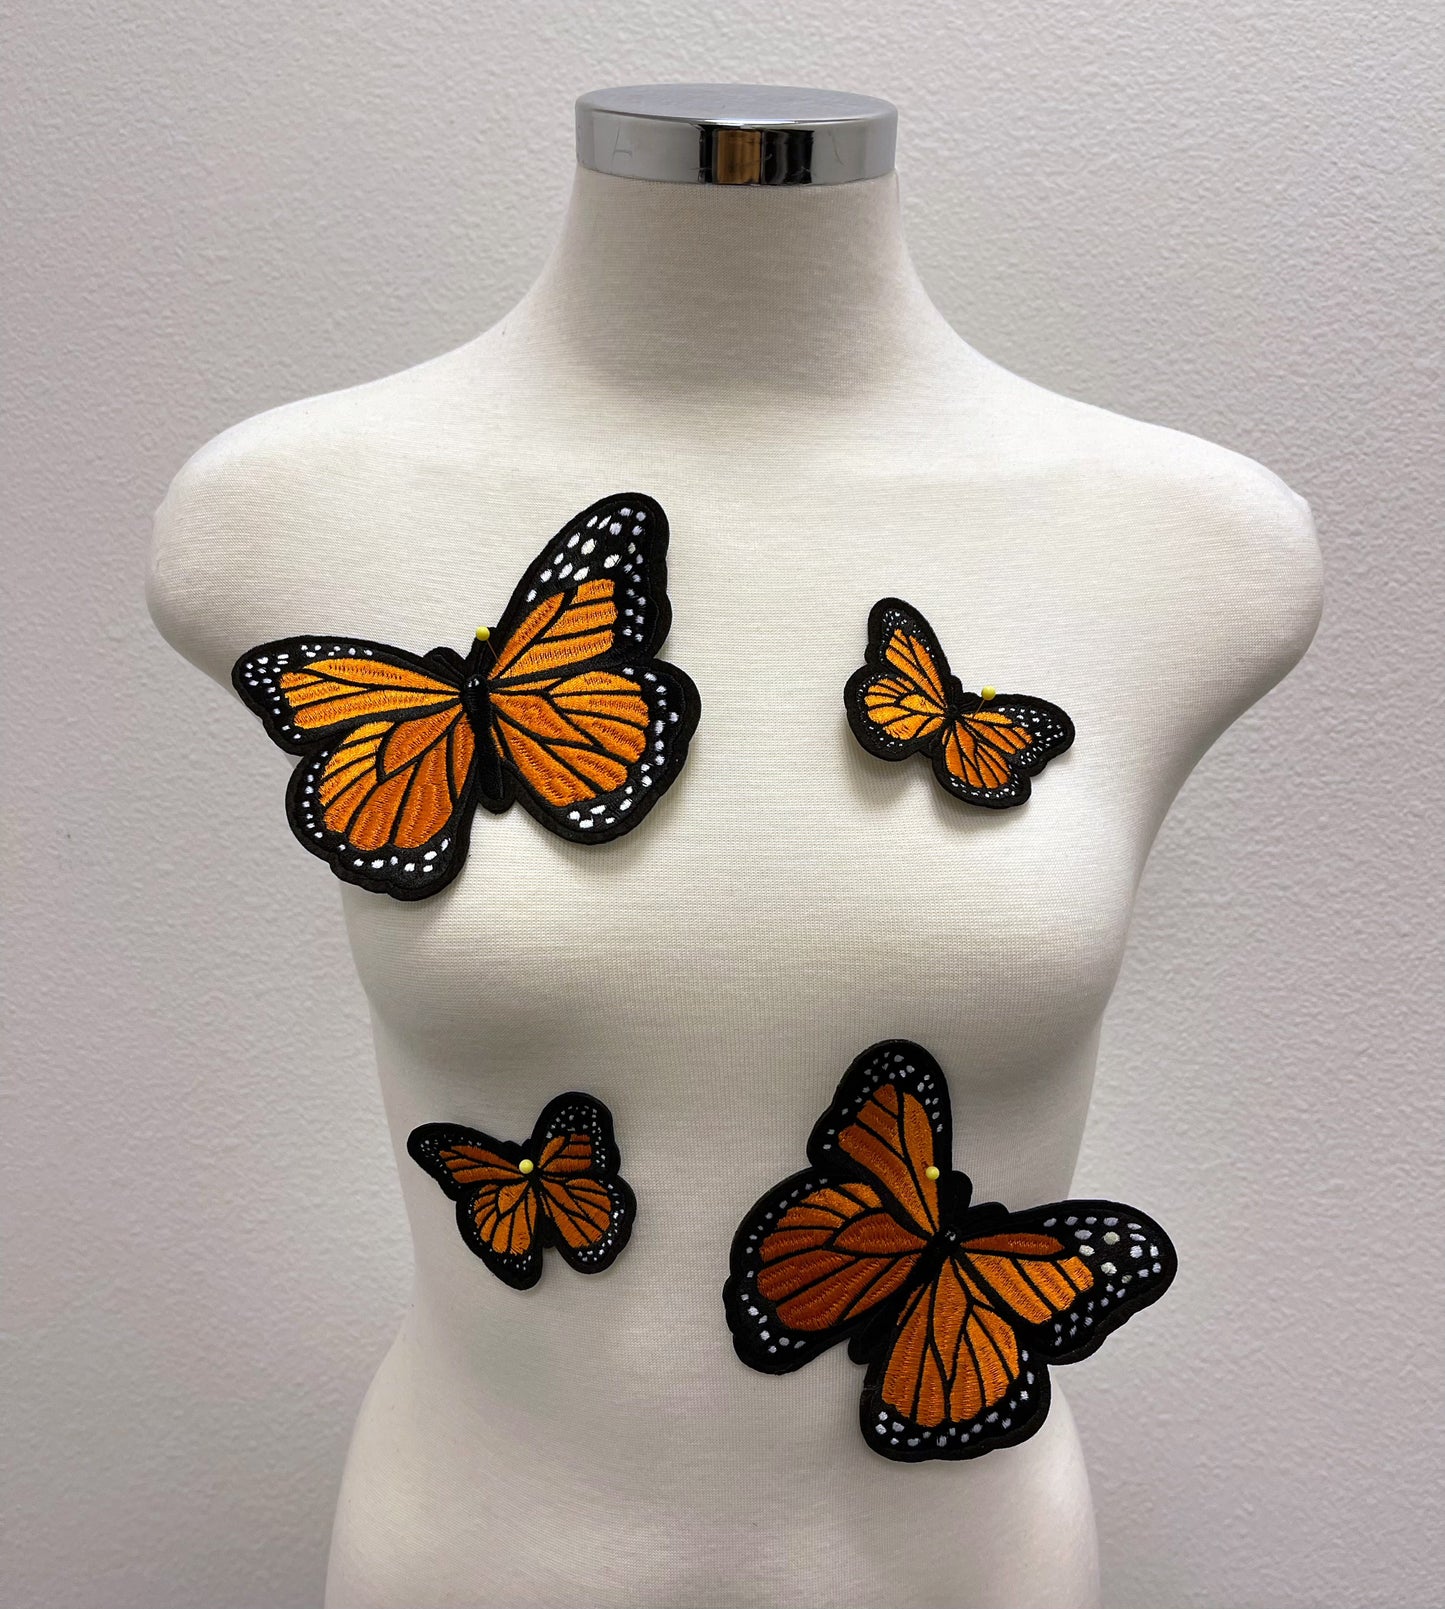 Monarch Butterfly patches in 3 sizes